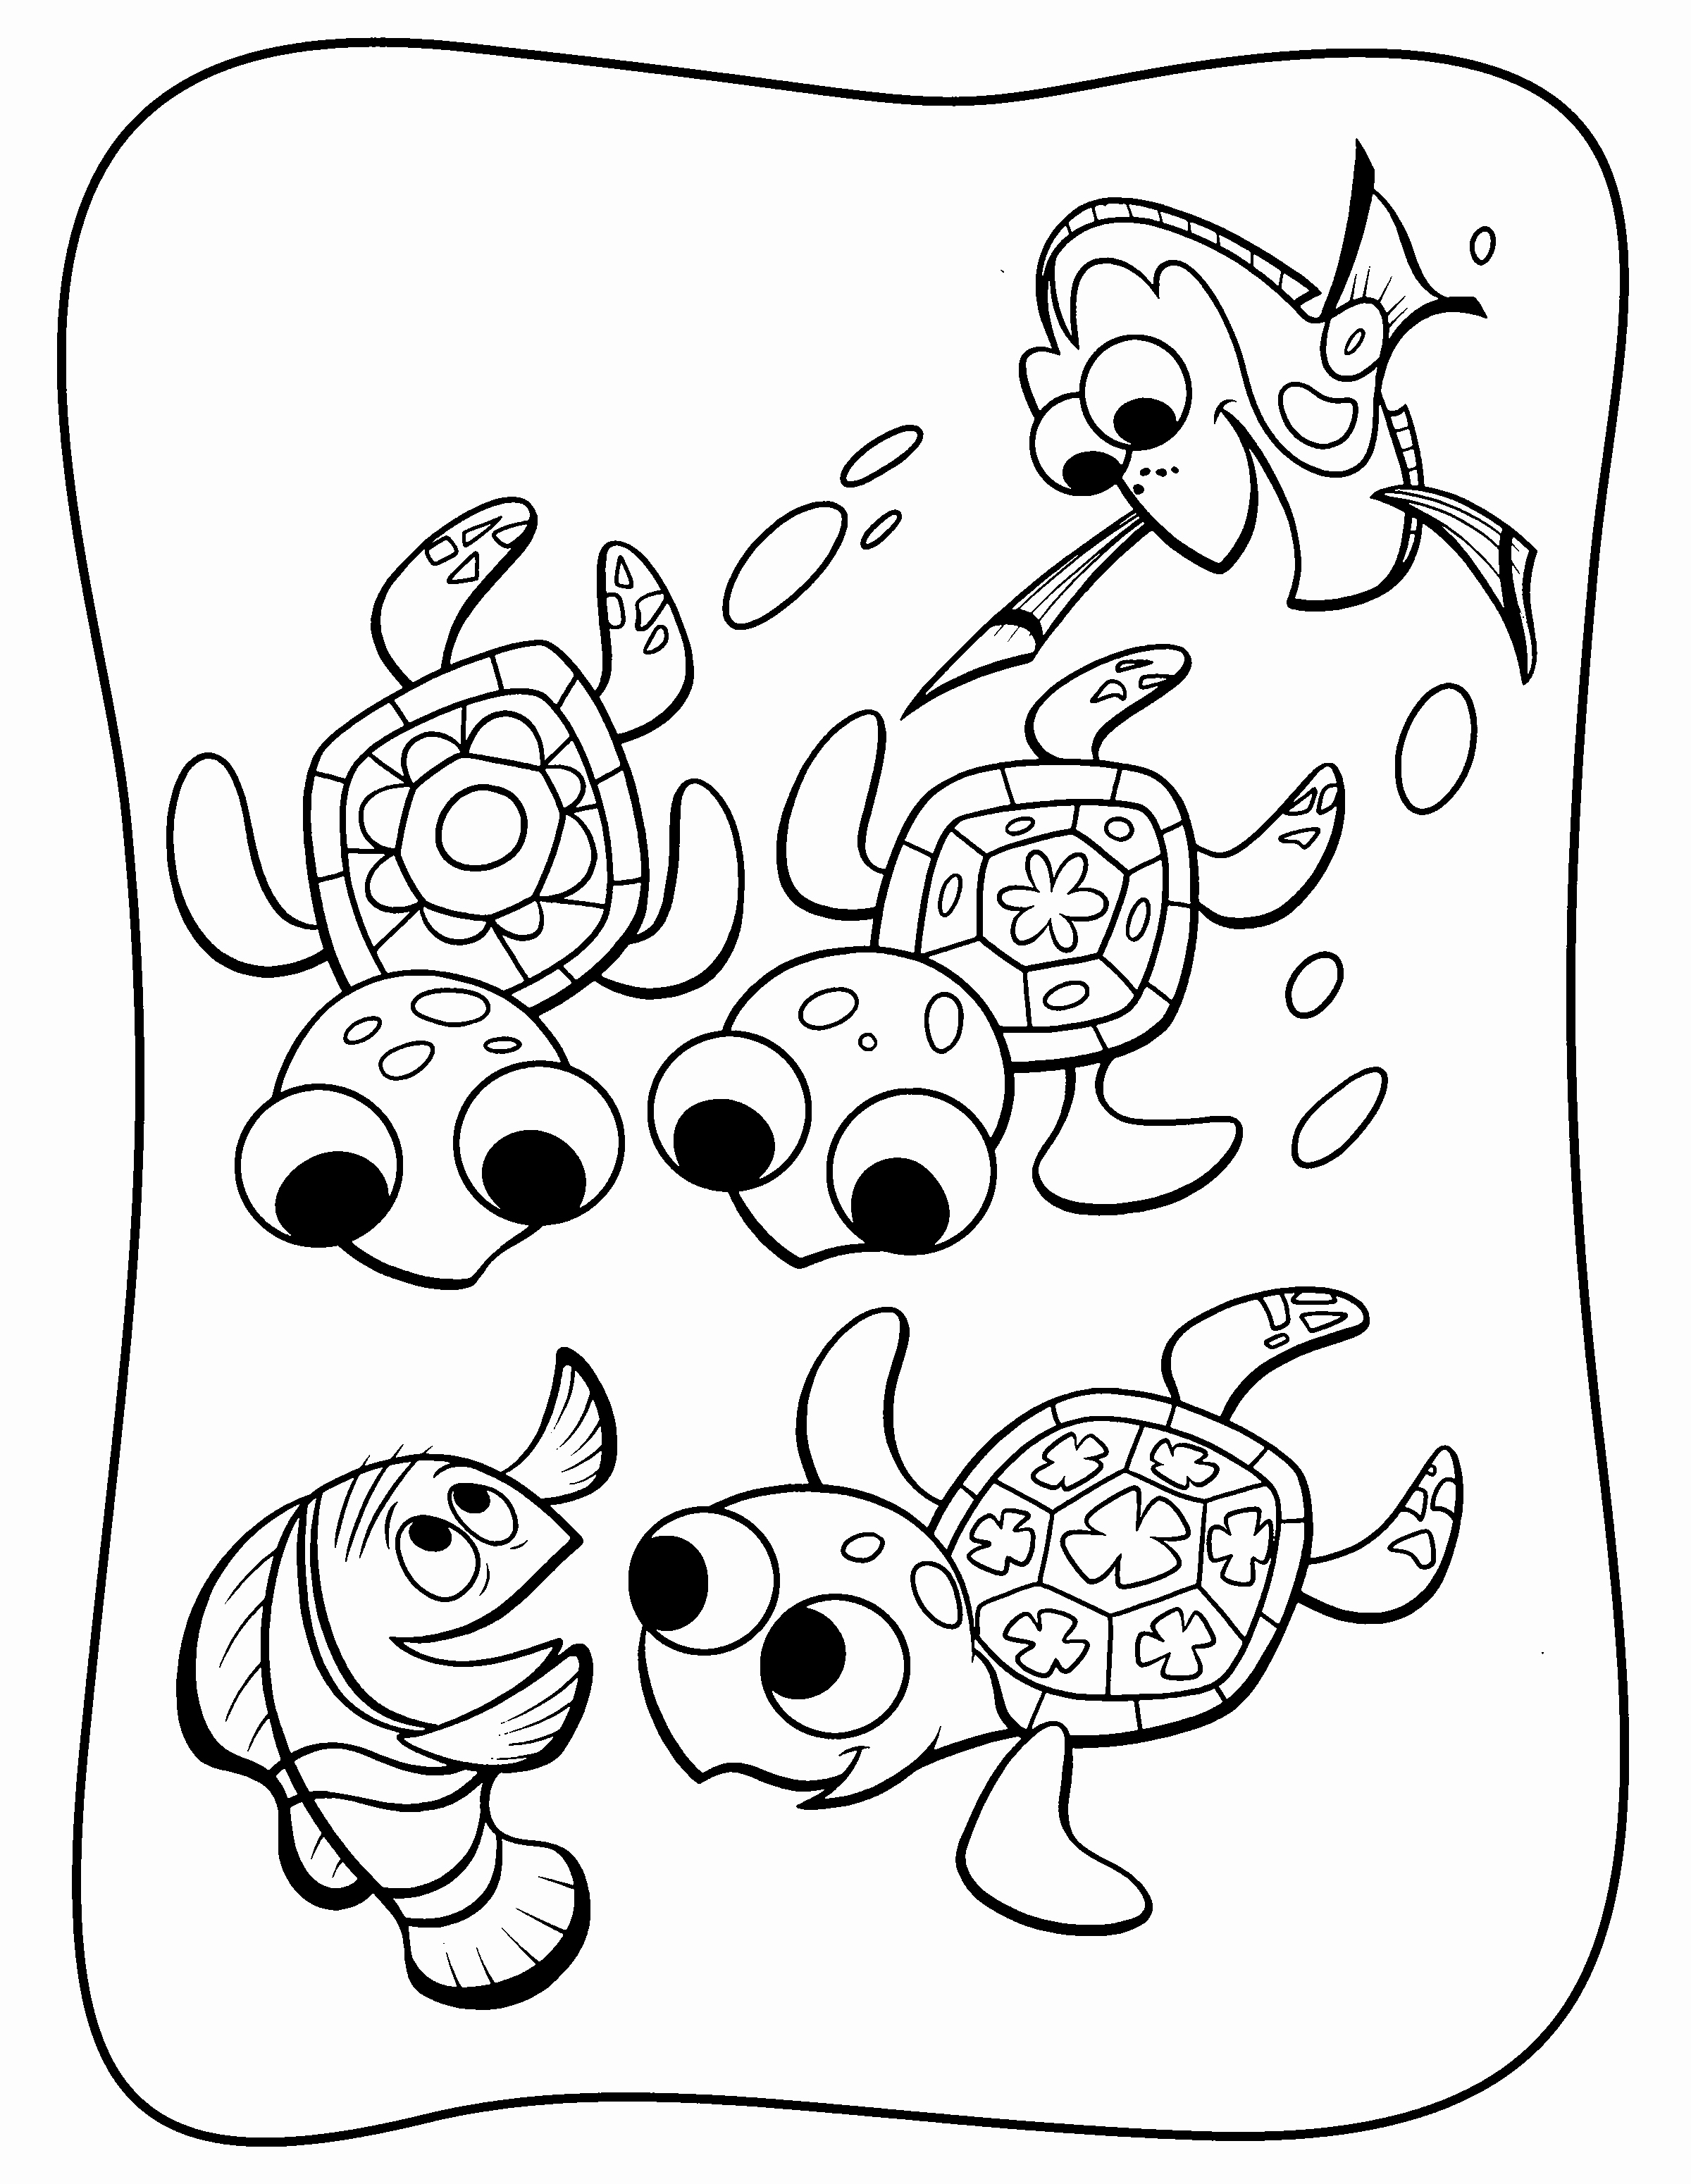 Finding Nemo Turtle Coloring Pages at Free printable